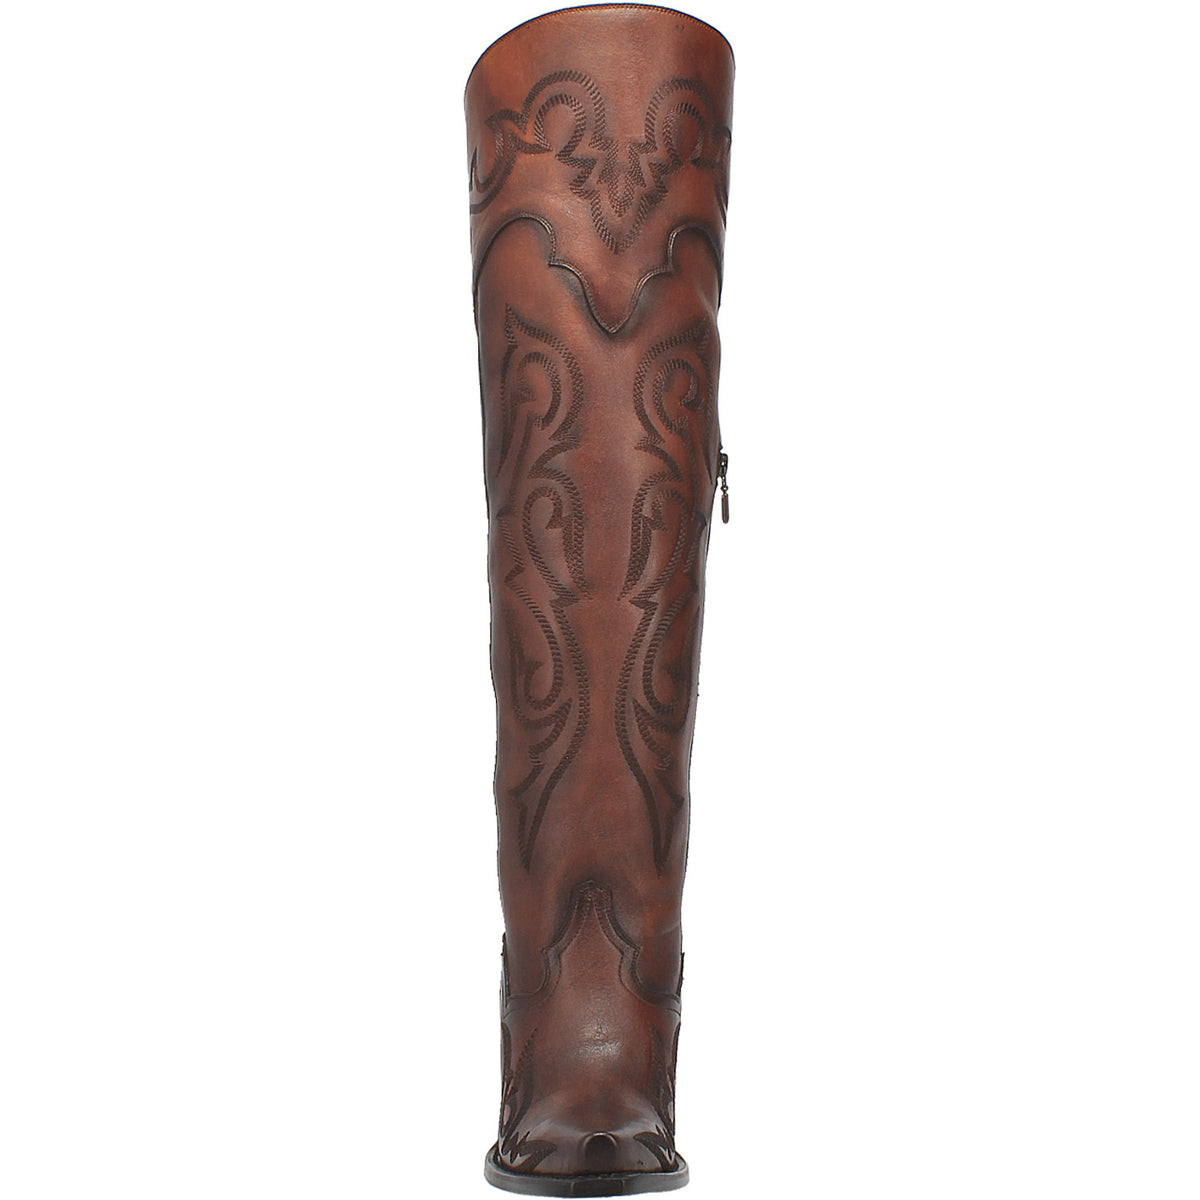 SEDUCTRESS LEATHER BOOT Cover